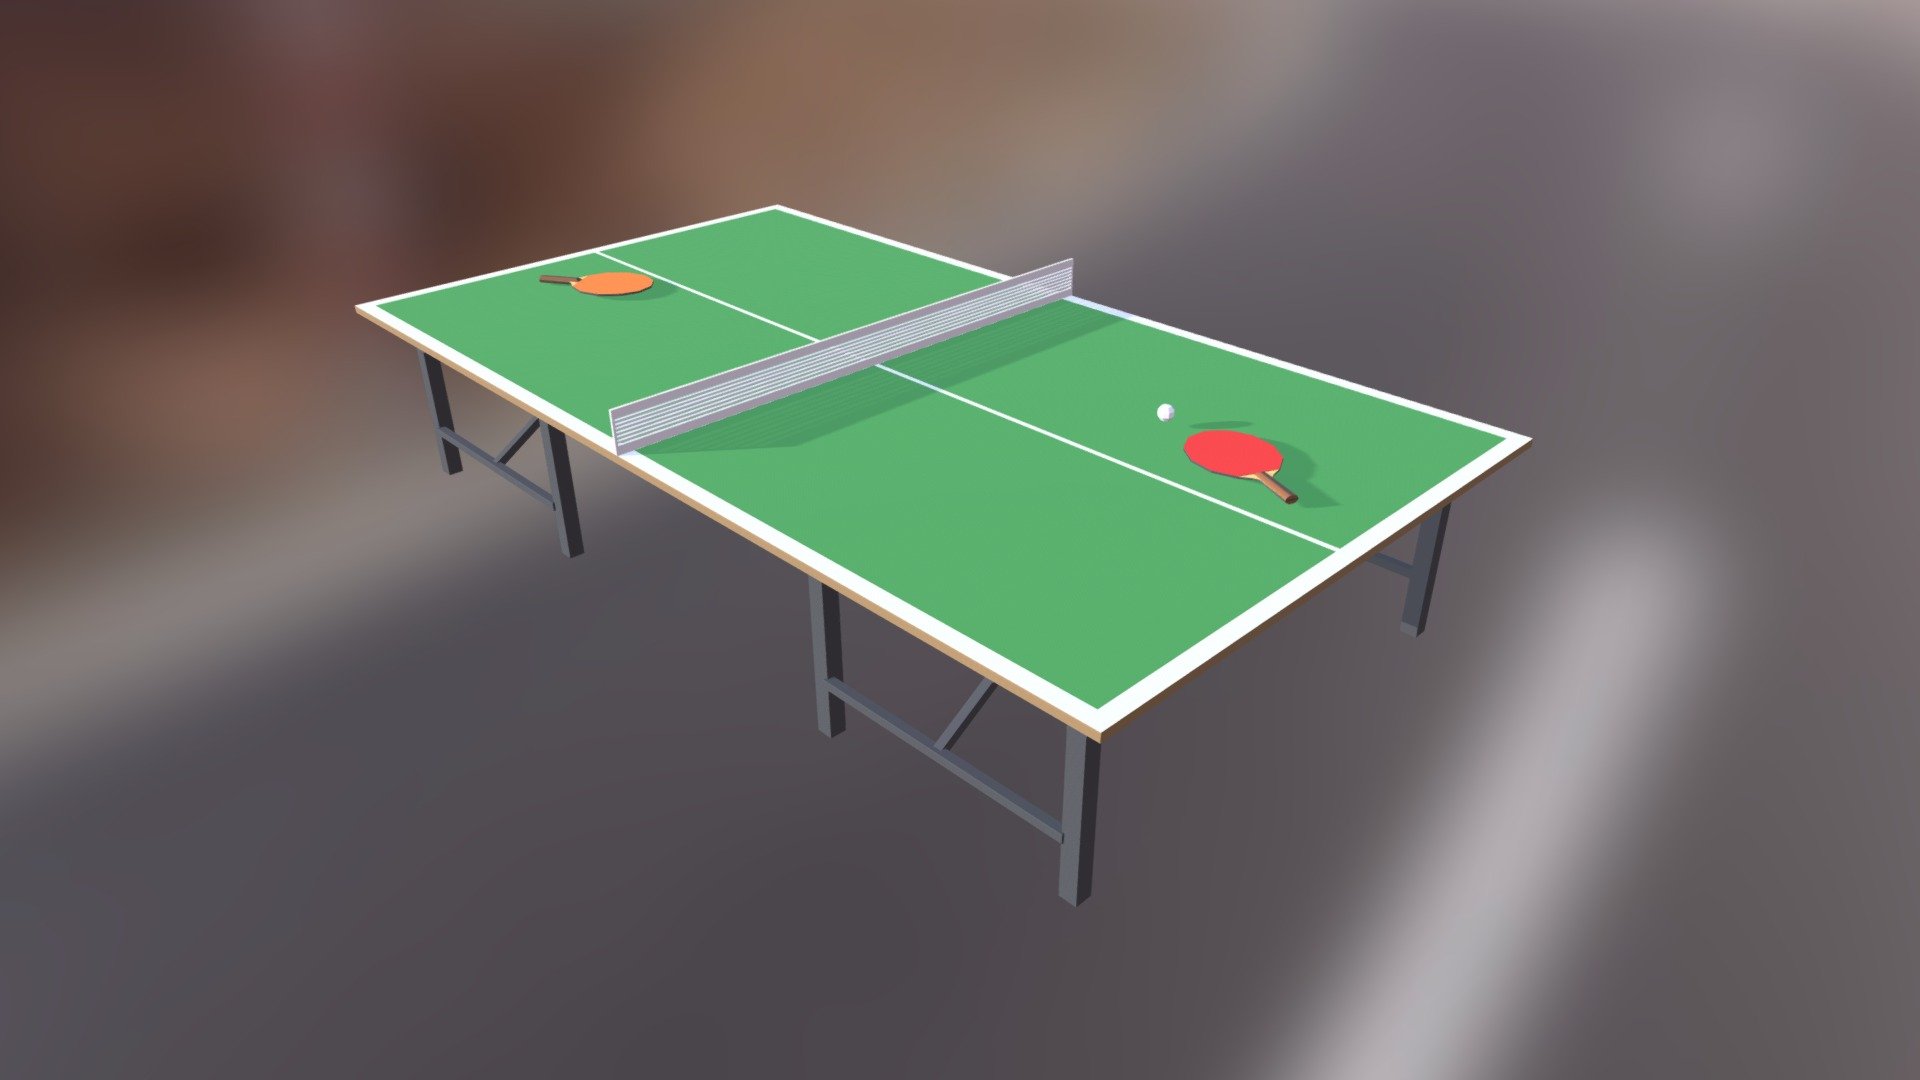 Table Tennis 3D Ping Pong Game Game for Android - Download